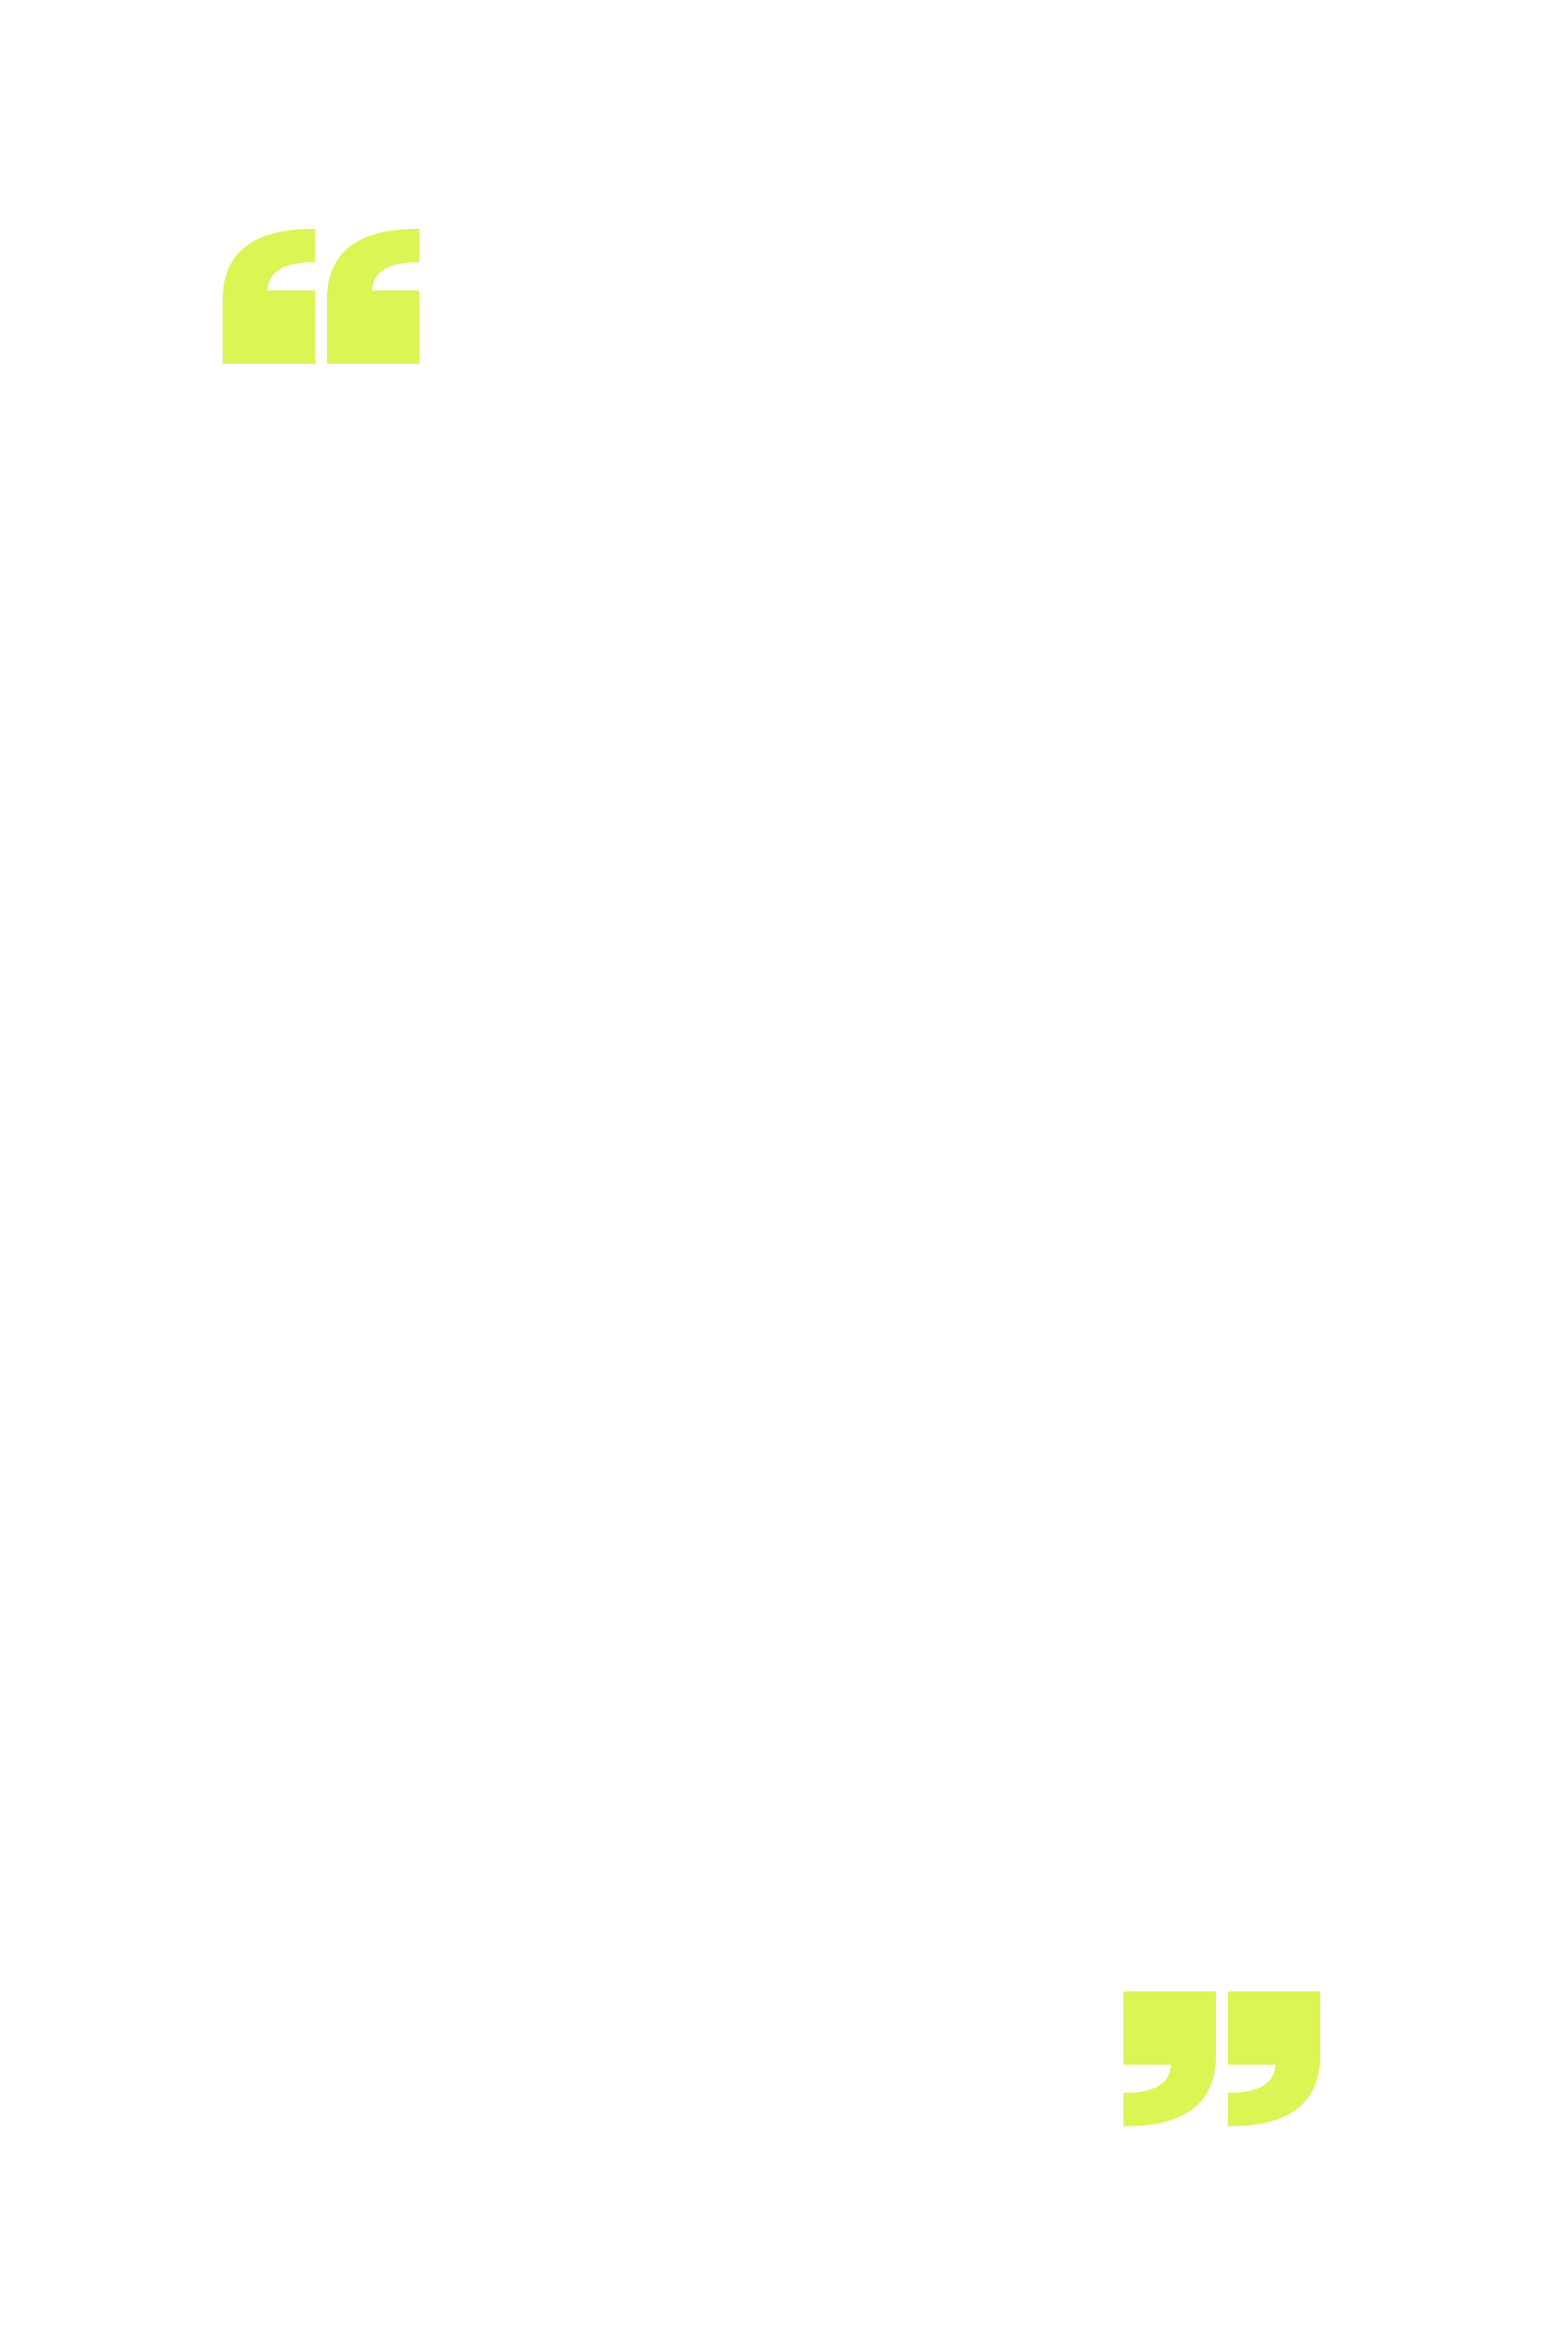 you just have to really love what you do, The love has to be bigger than all the troubles.